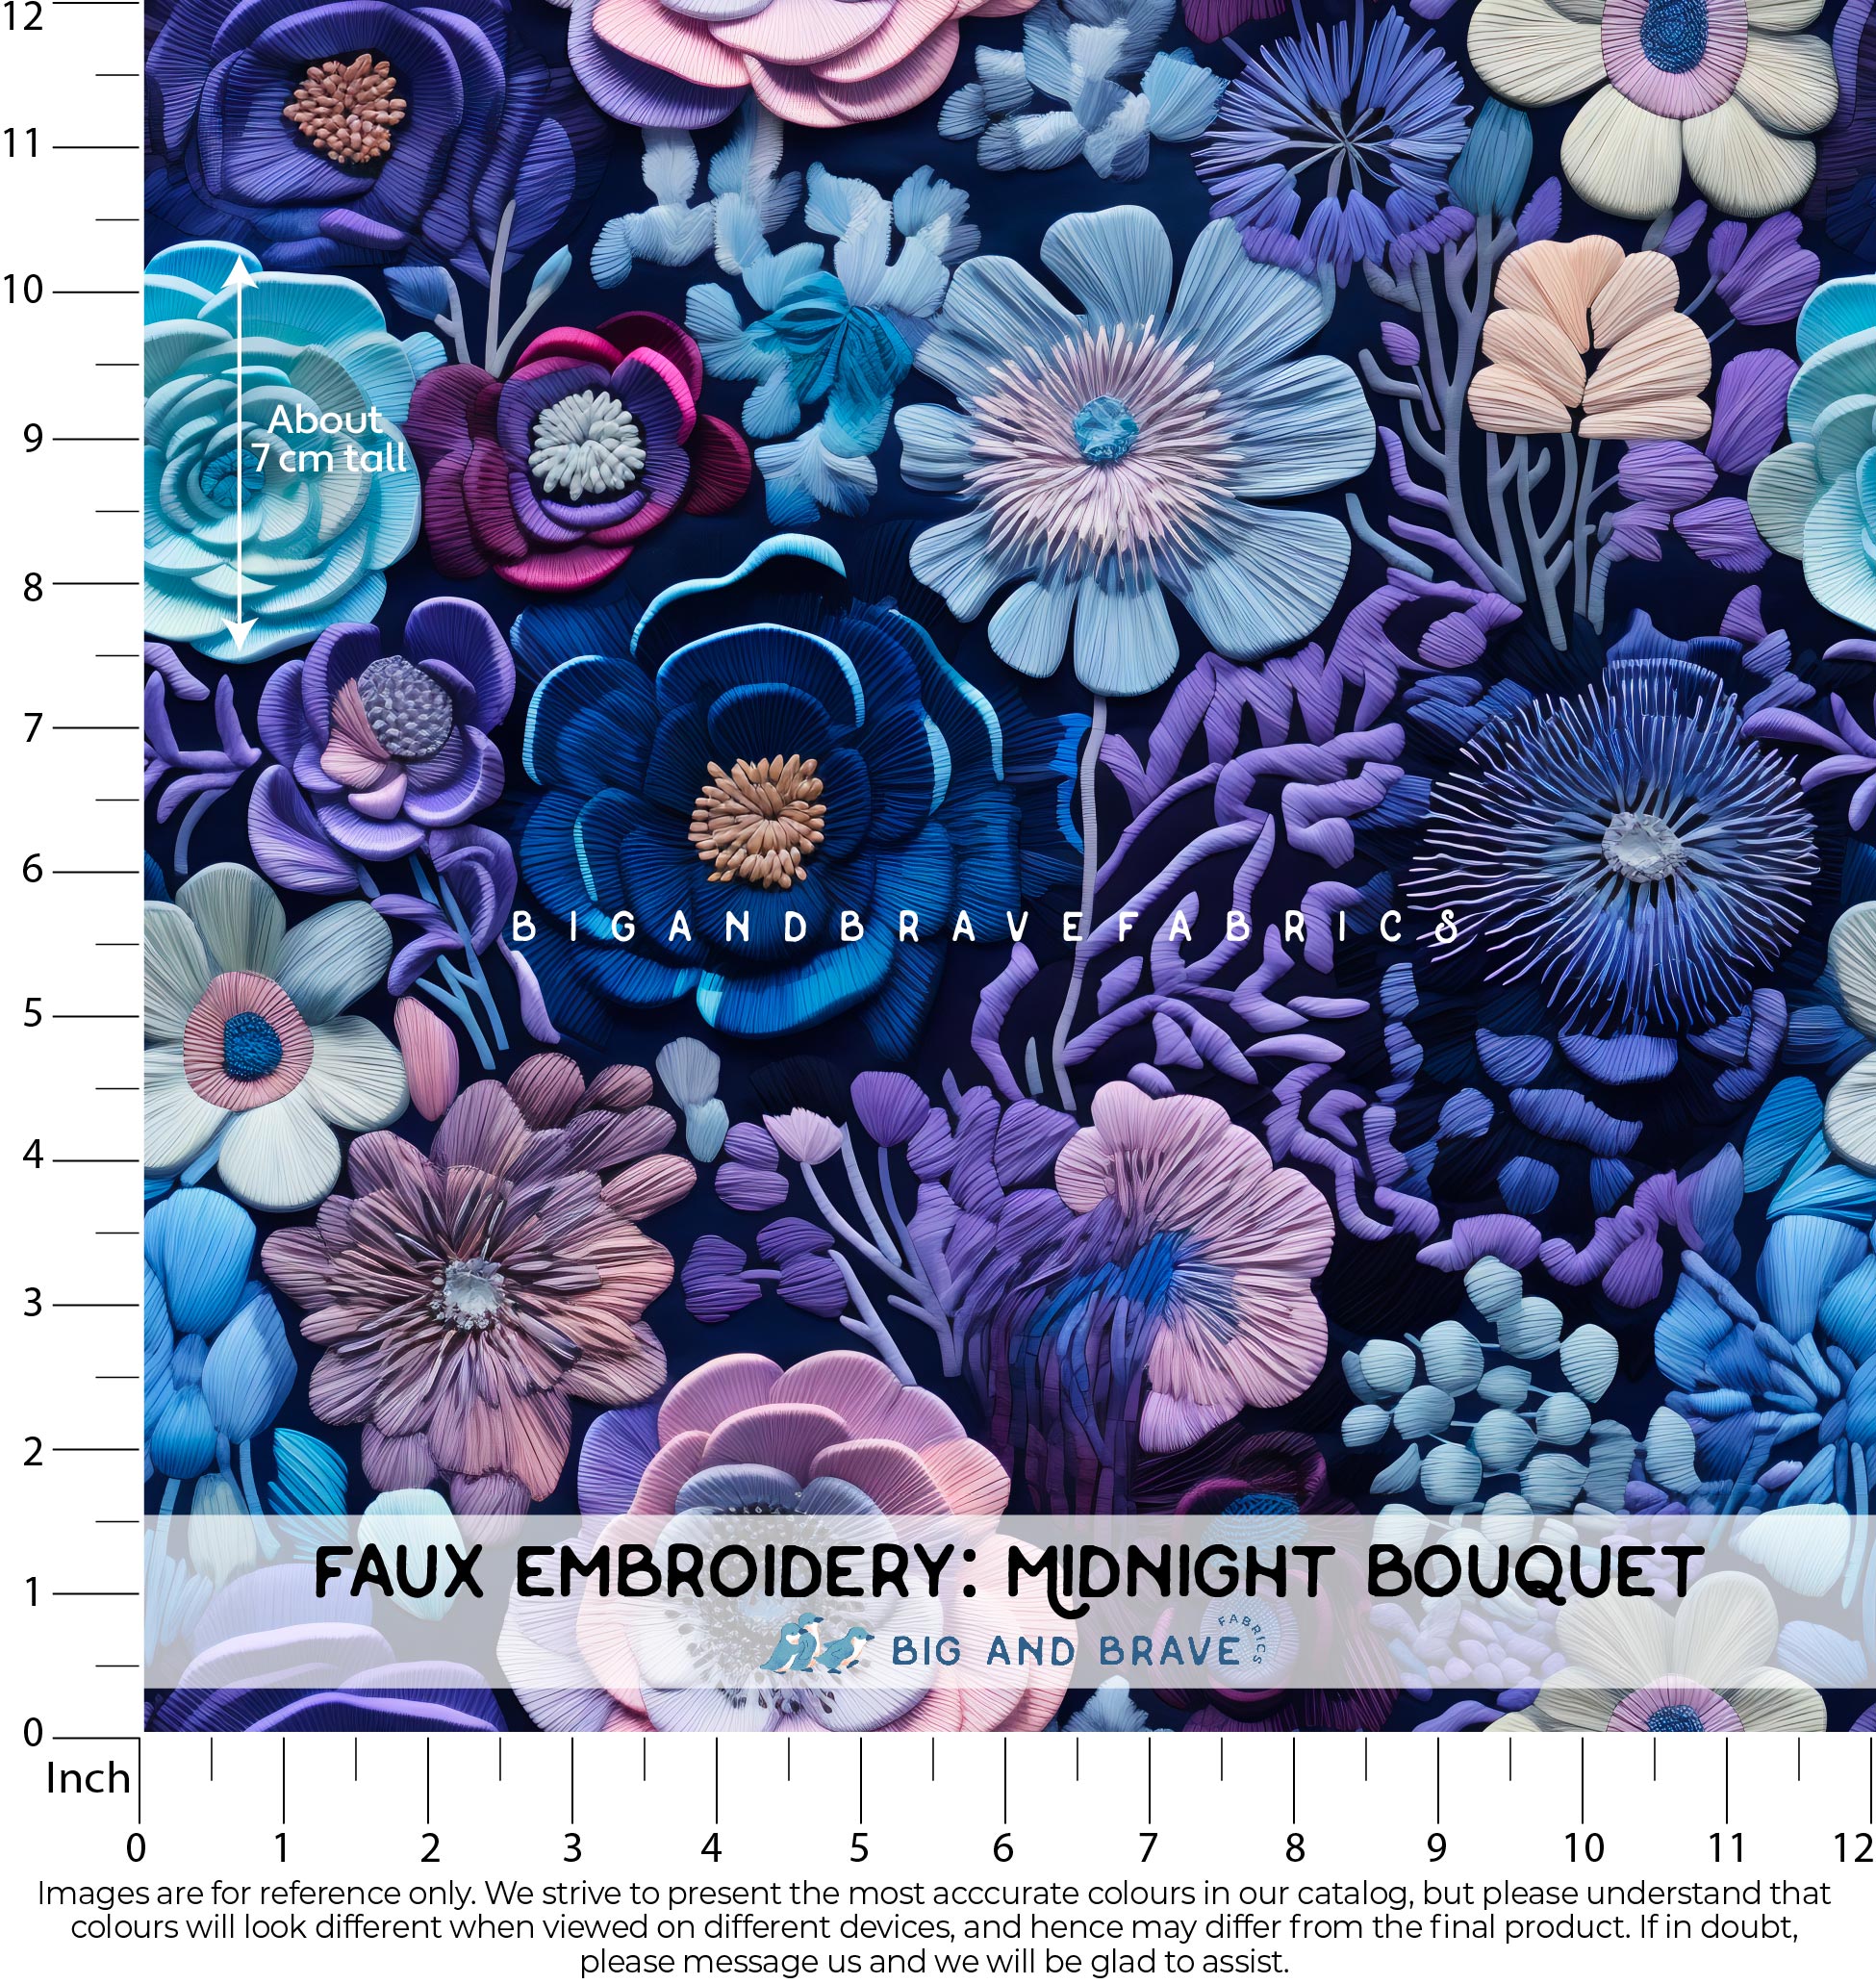 Faux Embroidery, Midnight Bouquet